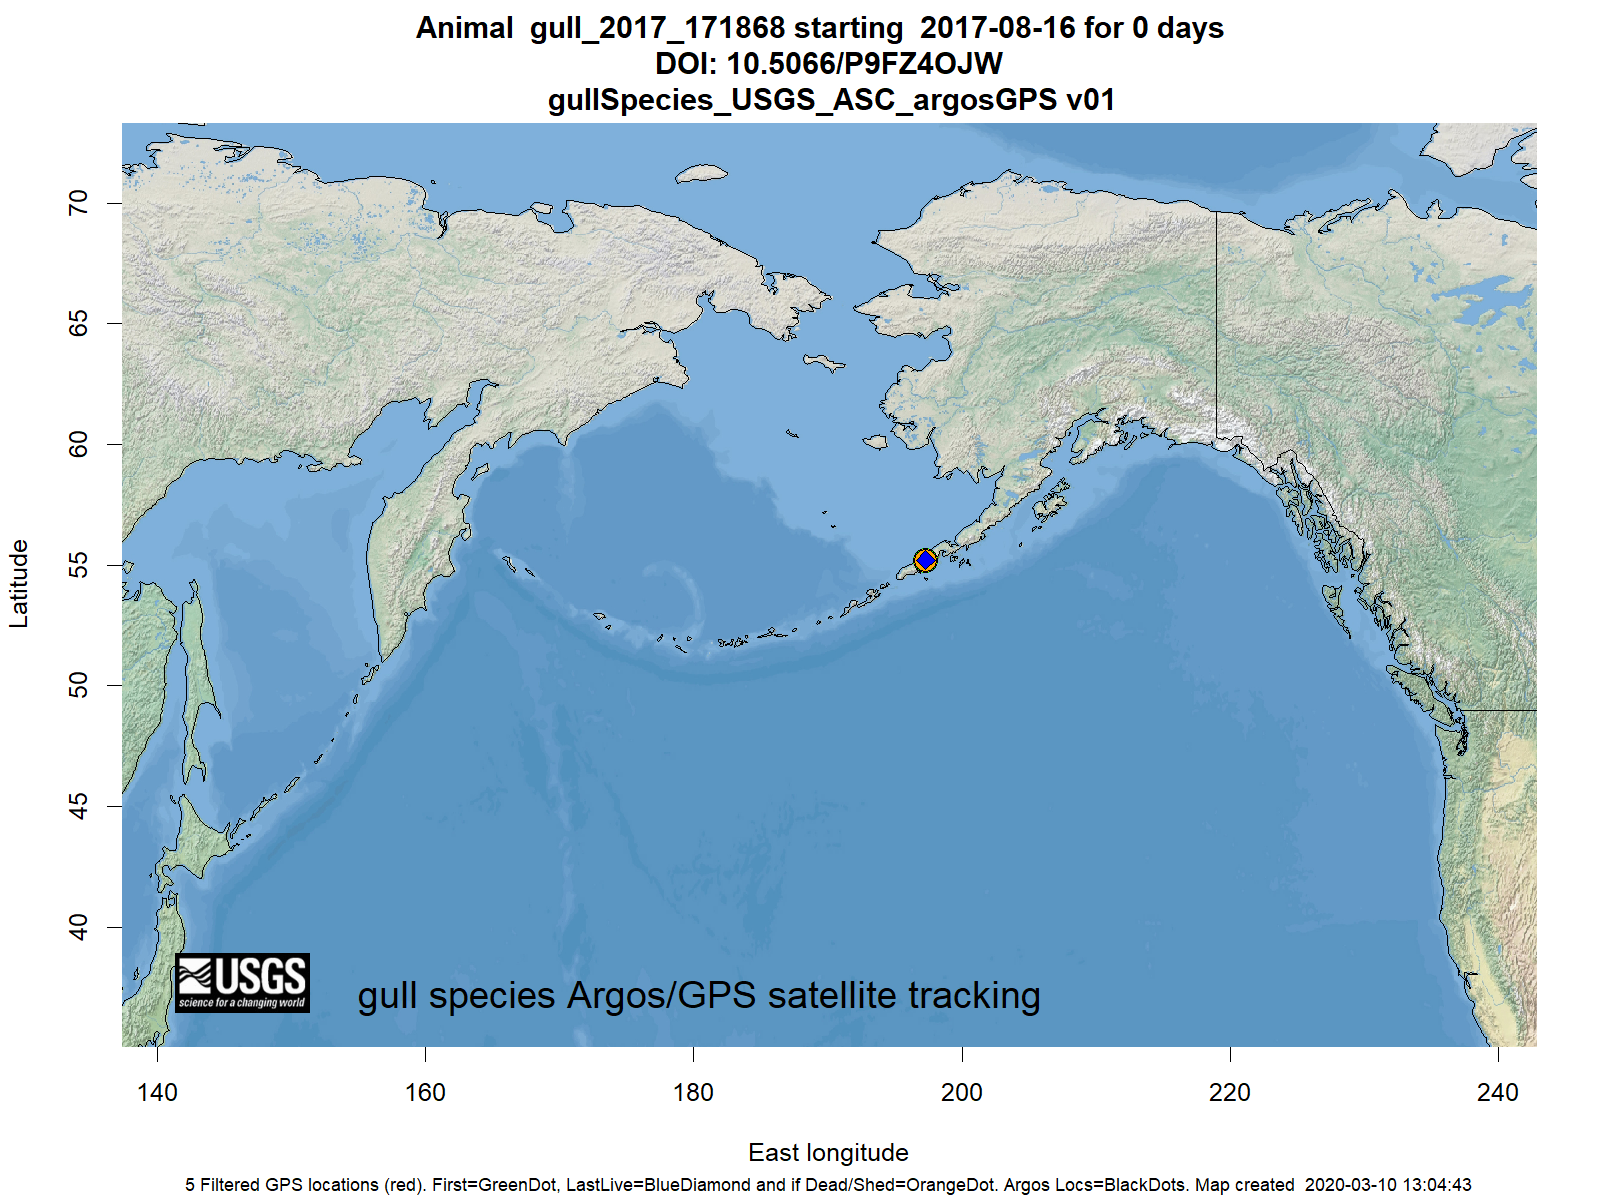 Tracking map for species gull_2017_171868